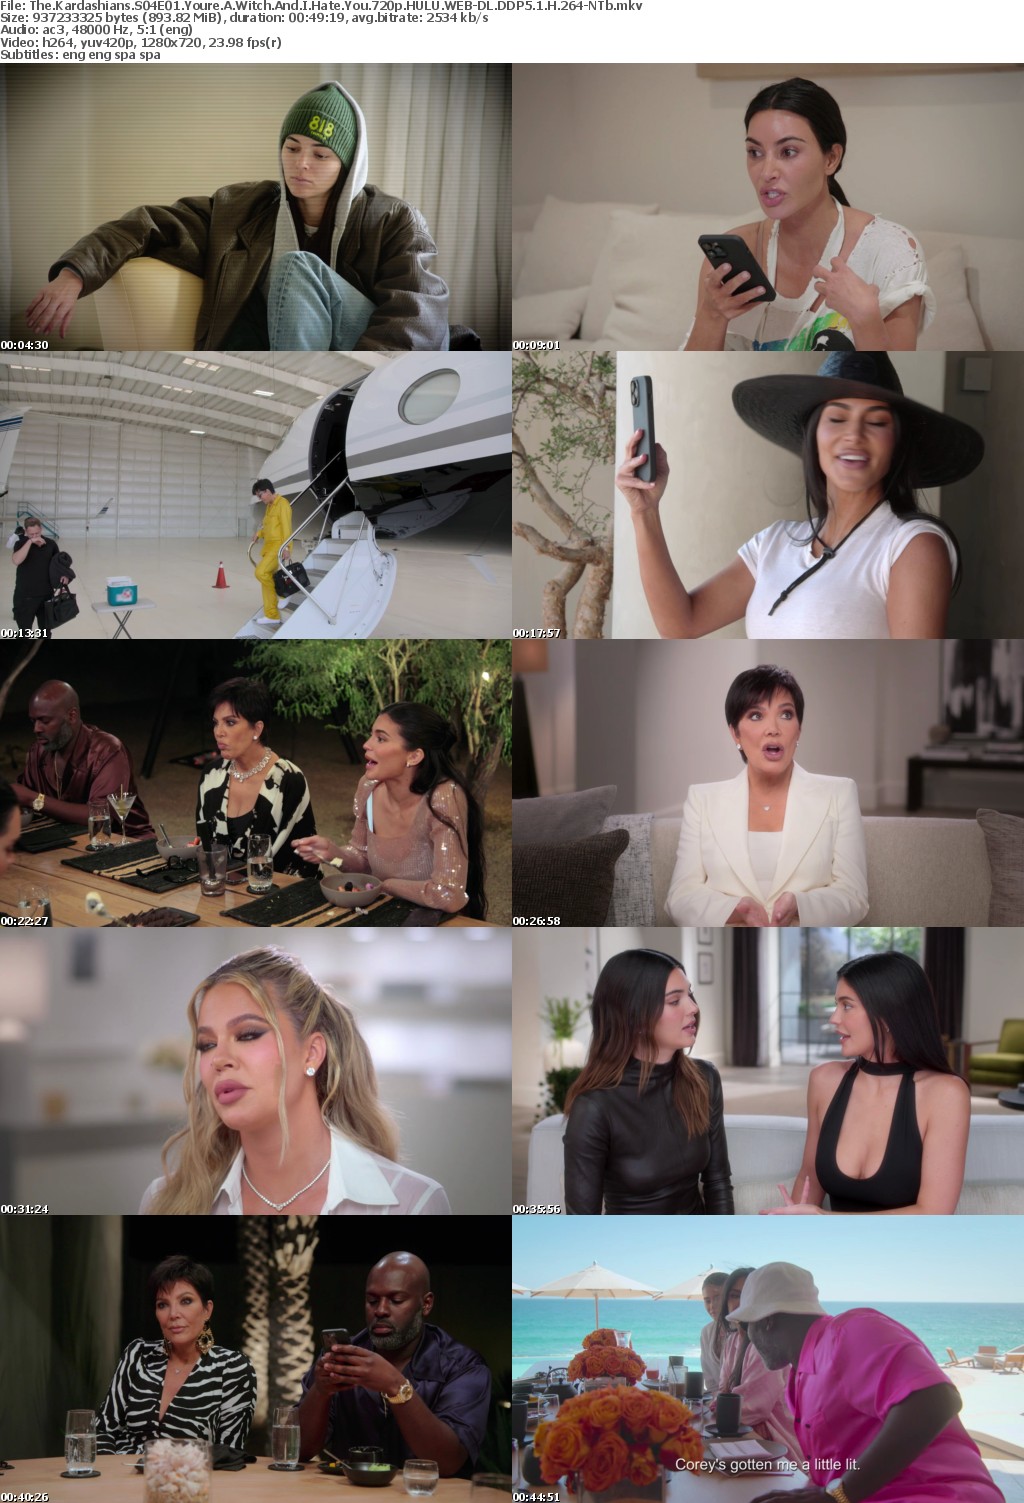 The Kardashians S04E01 Youre A Witch And I Hate You 720p HULU WEB-DL DDP5 1 H 264-NTb